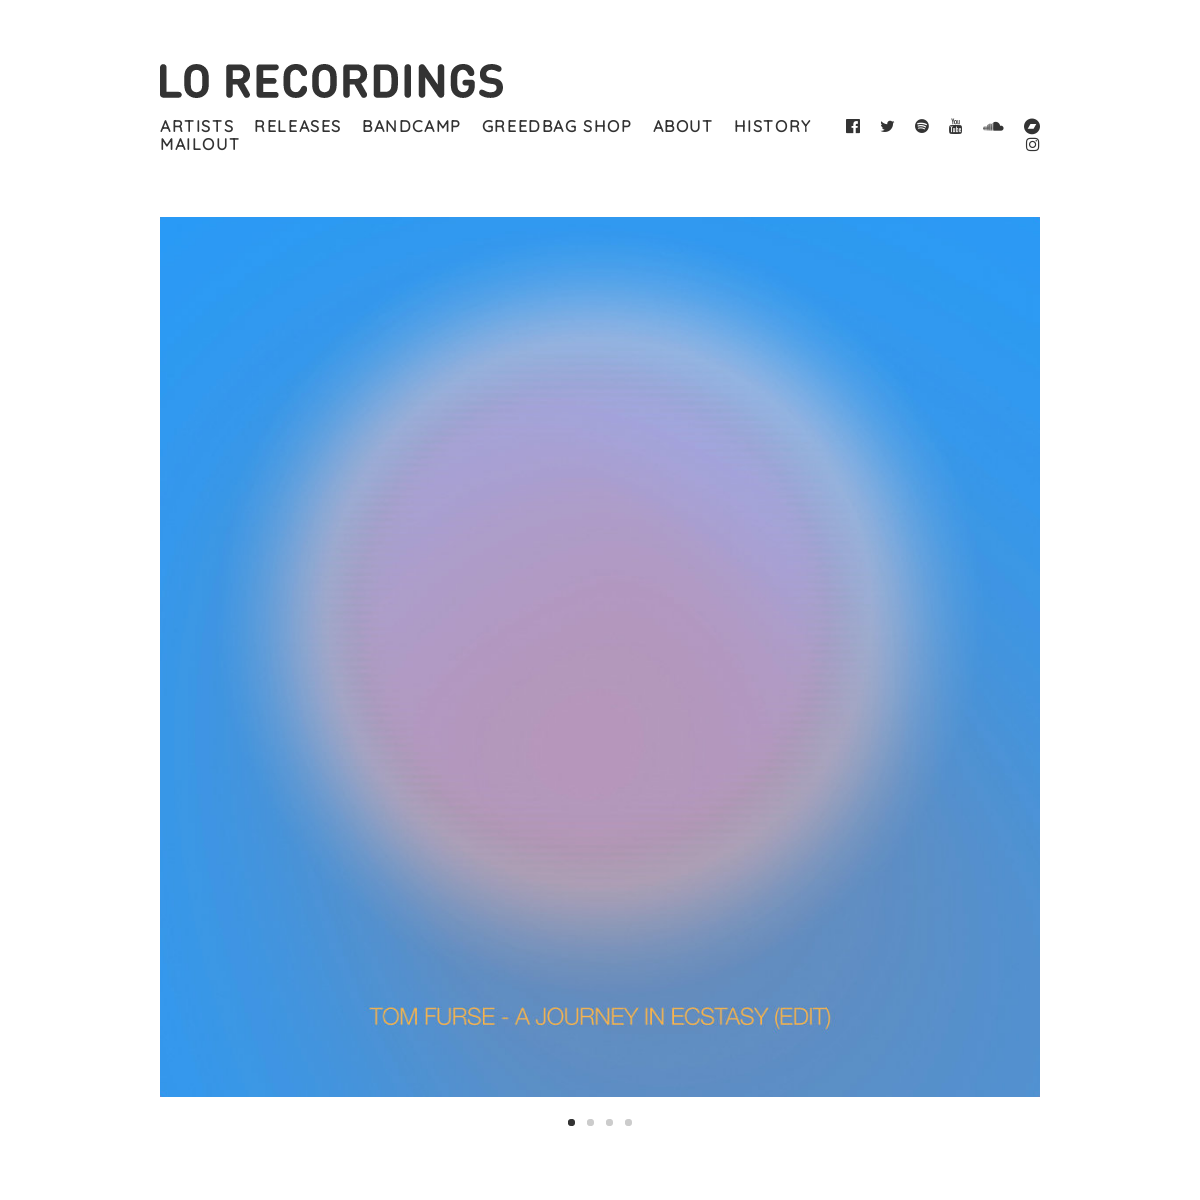 A complete backup of lorecordings.com